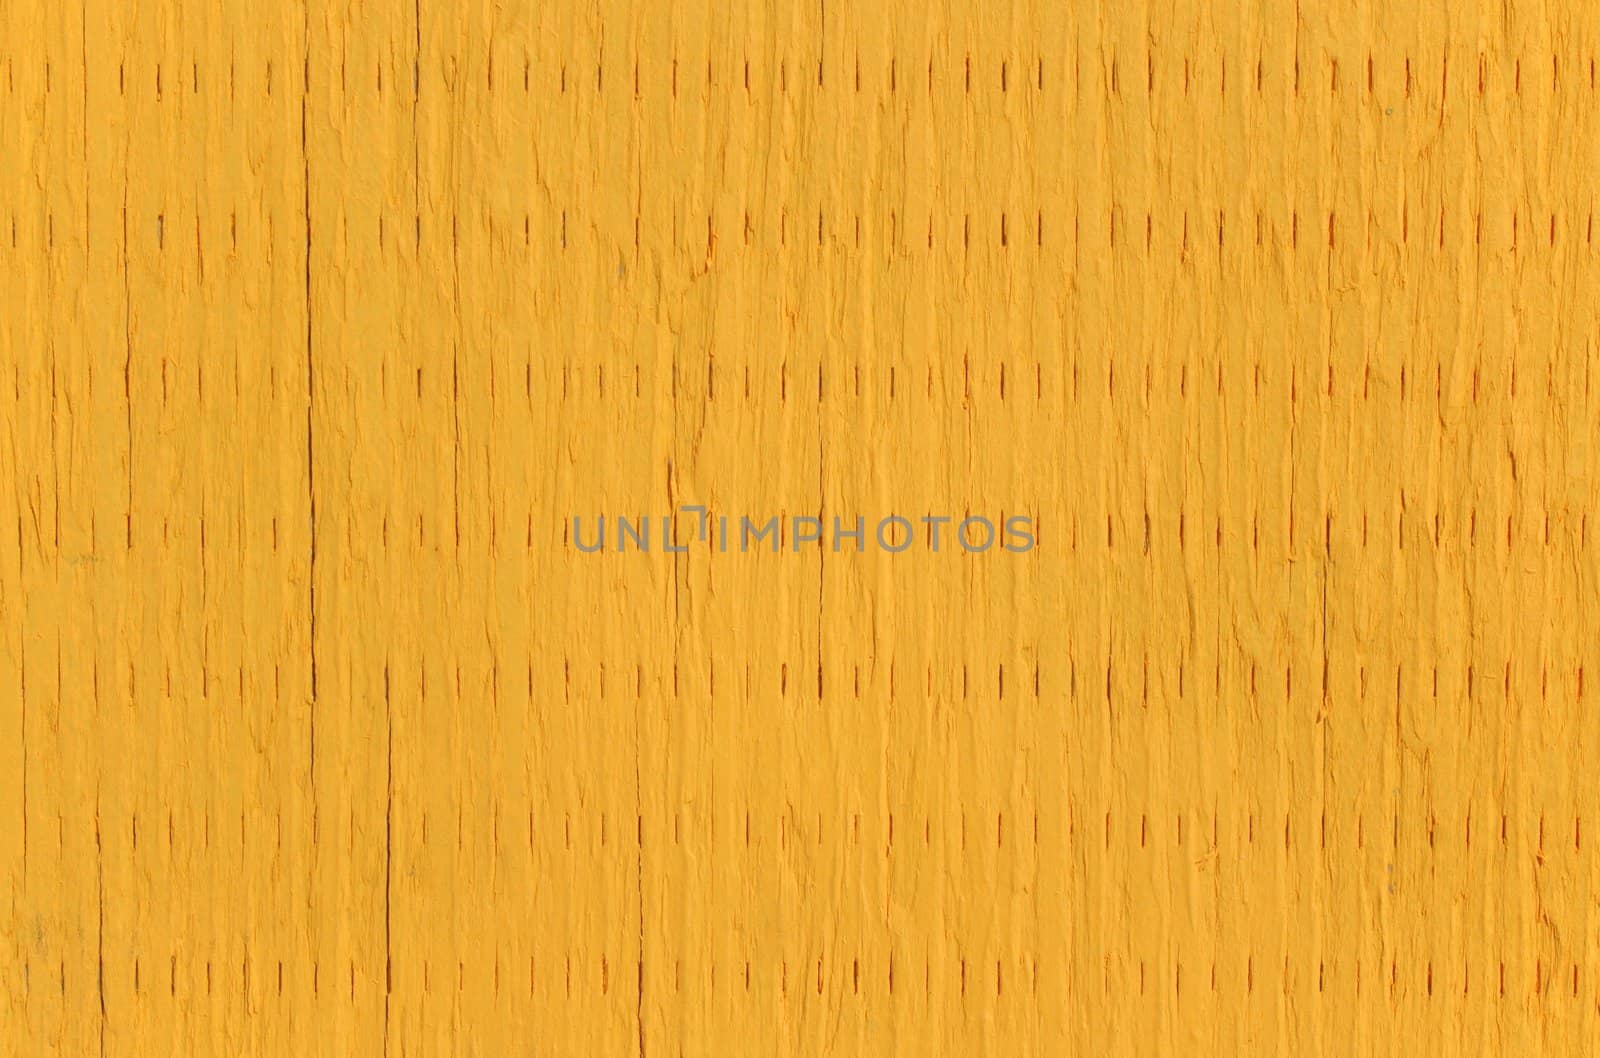 Vibrant background: wooden panel painted in bright yellow color.